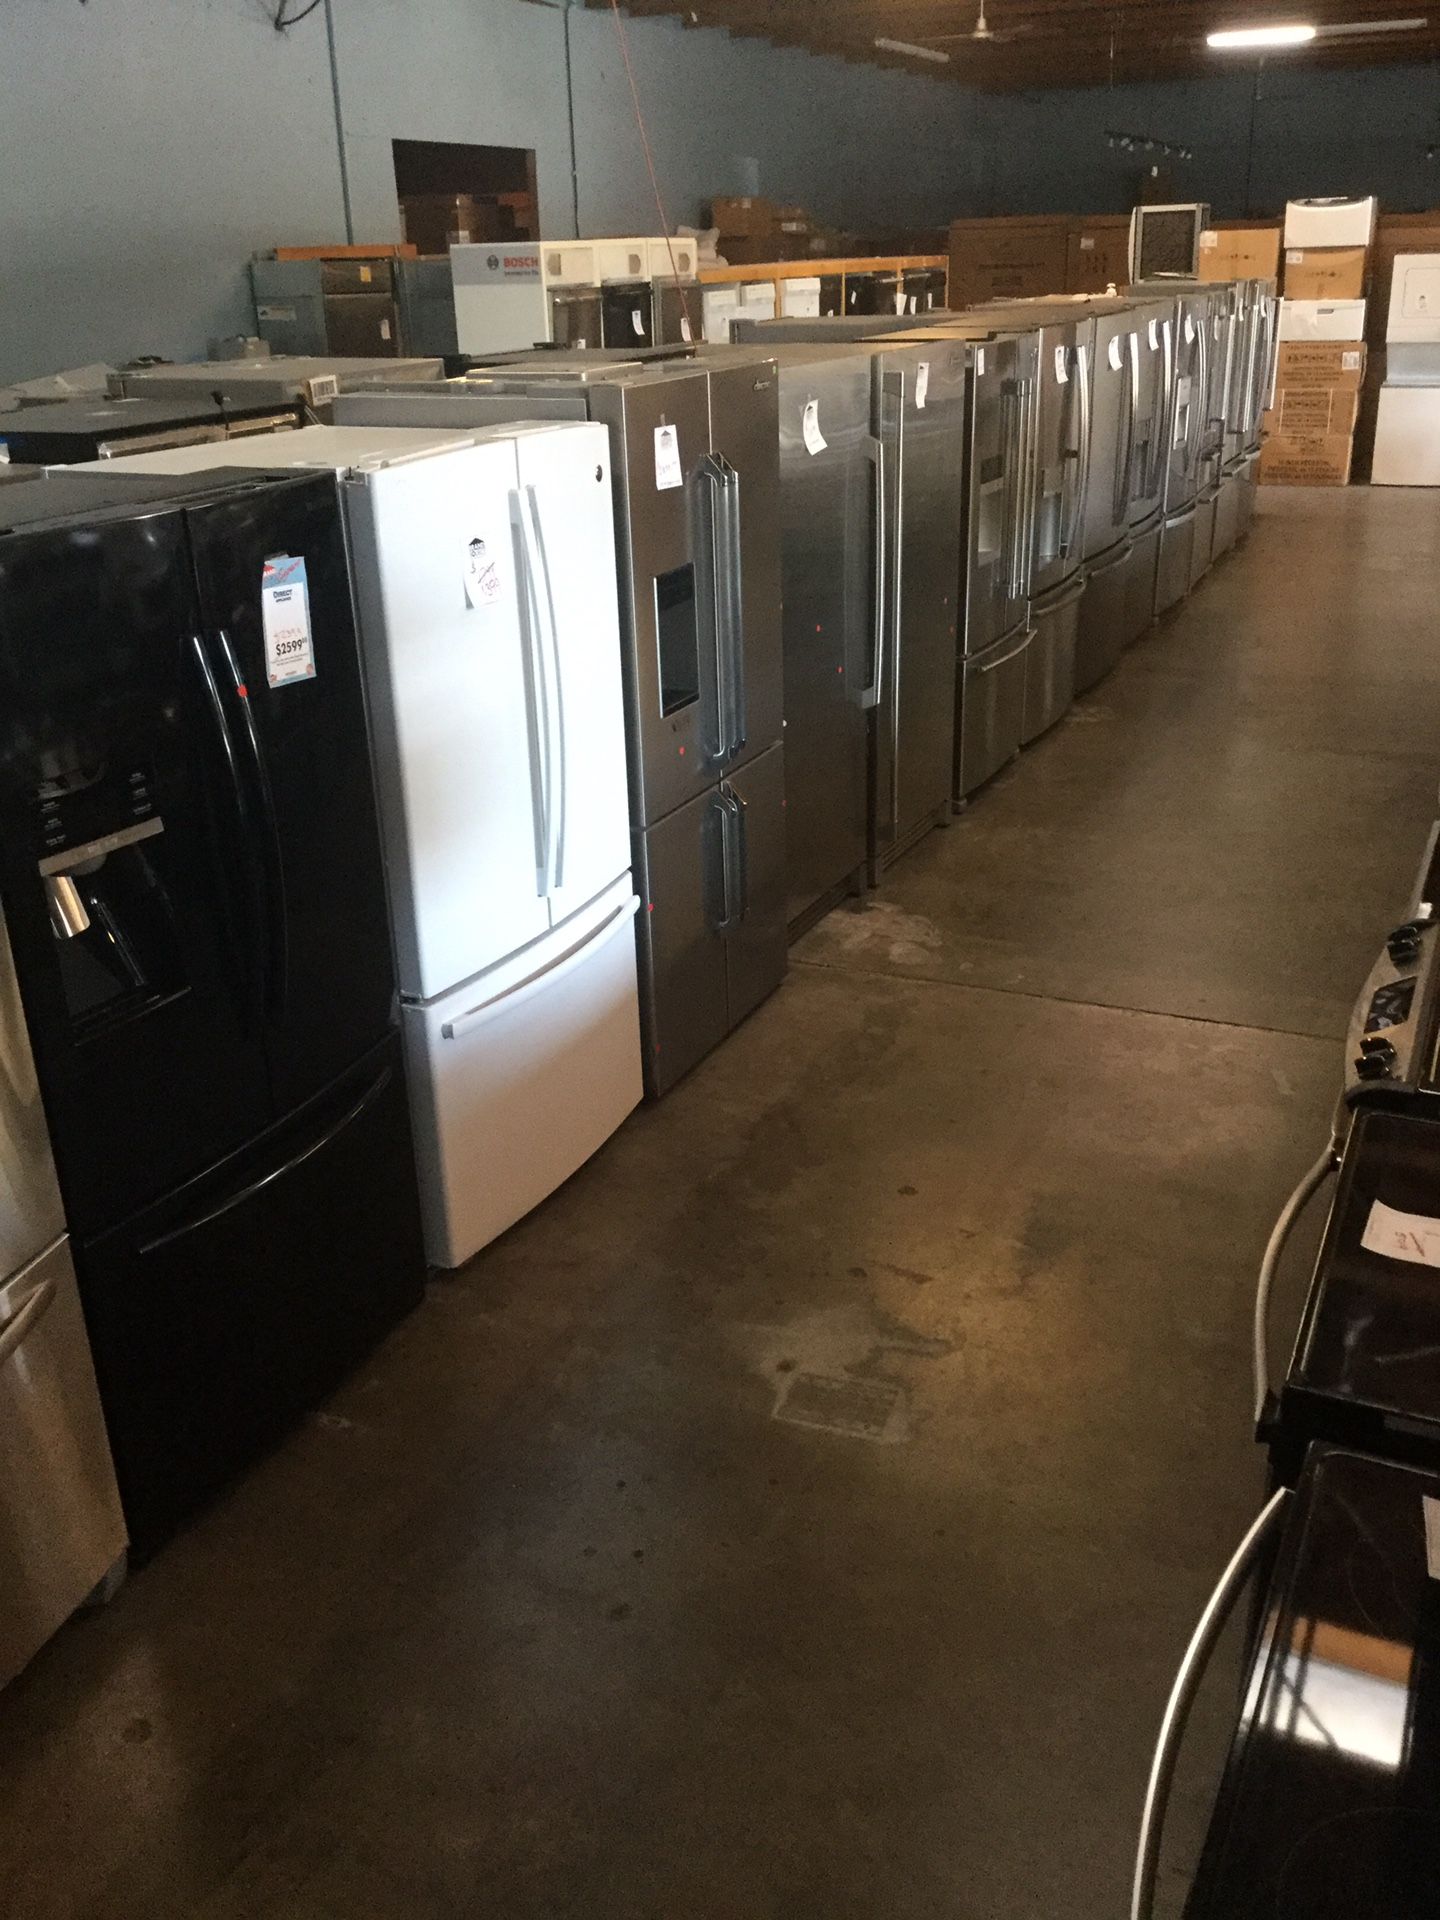 Sale!!!!! French door refrigerator, side by side, and top freezers!!!!